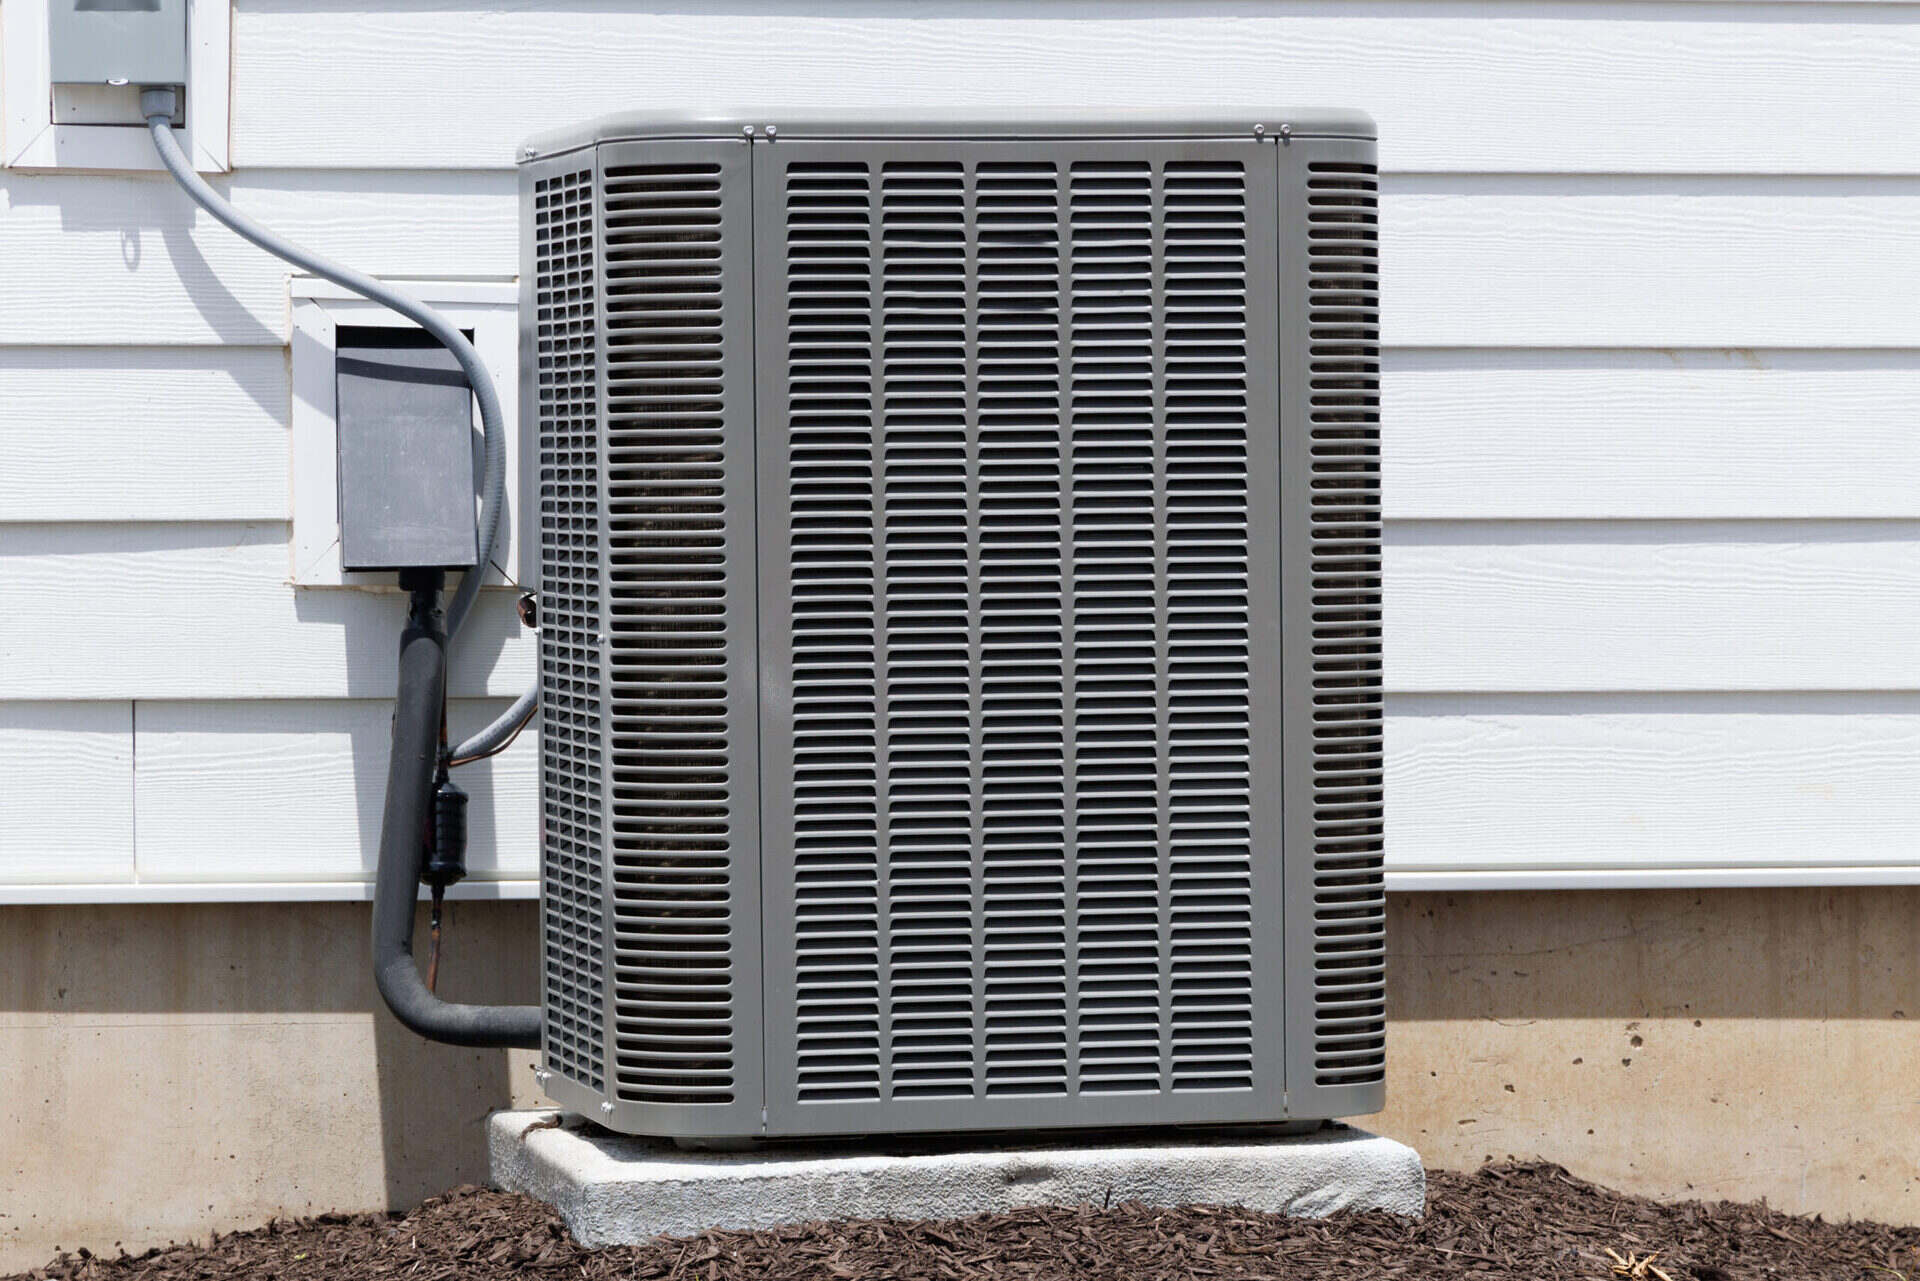 How To Protect An AC Outdoor Unit From Damage